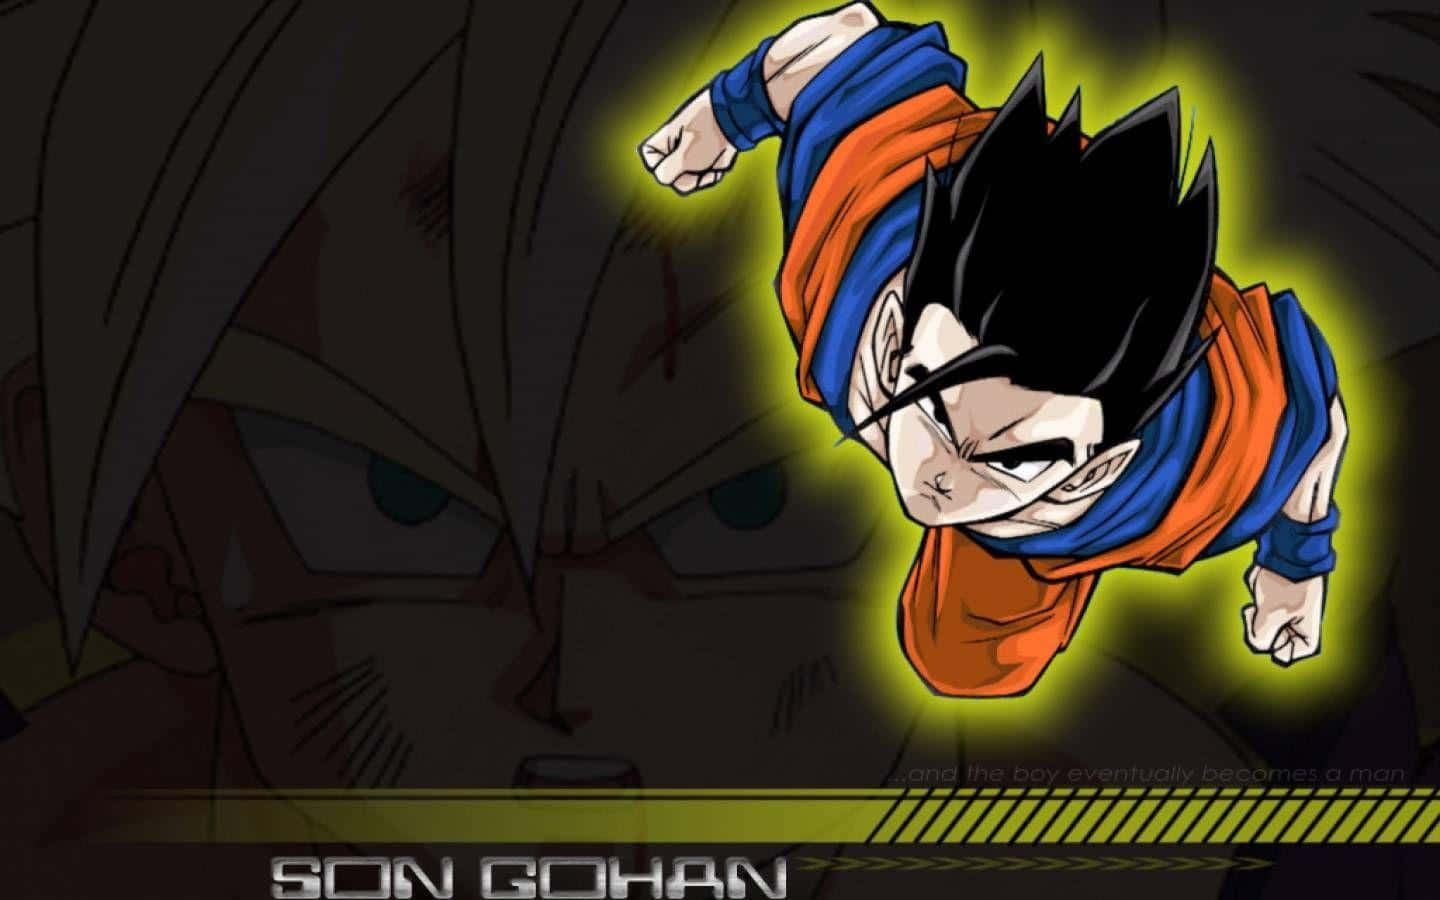 Mystic Gohan harnesses the power of mysticism to tap into his greater potential! Wallpaper